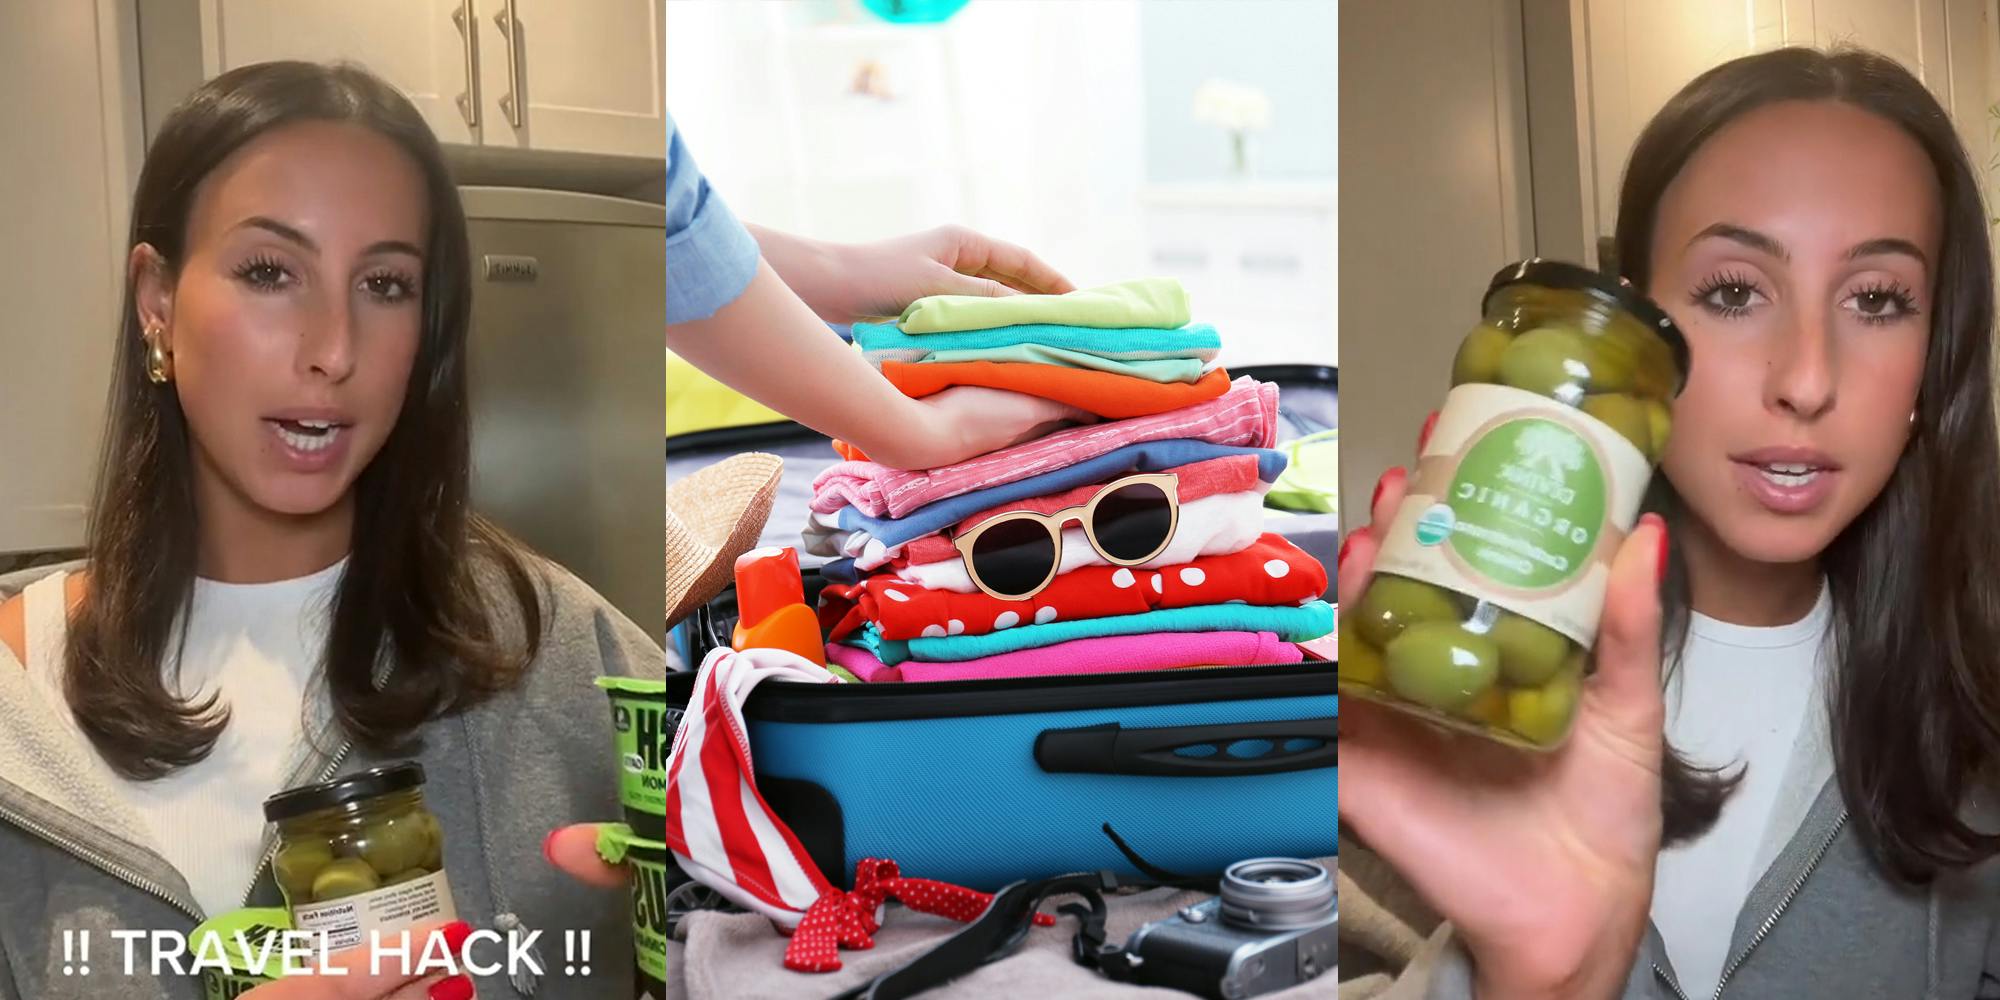 person speaking in kitchen with jar of olives in hand with caption "!!TRAVEL HACK!!" (l) person packing luggage (c) person speaking in kitchen with jar of olives in hand (r)